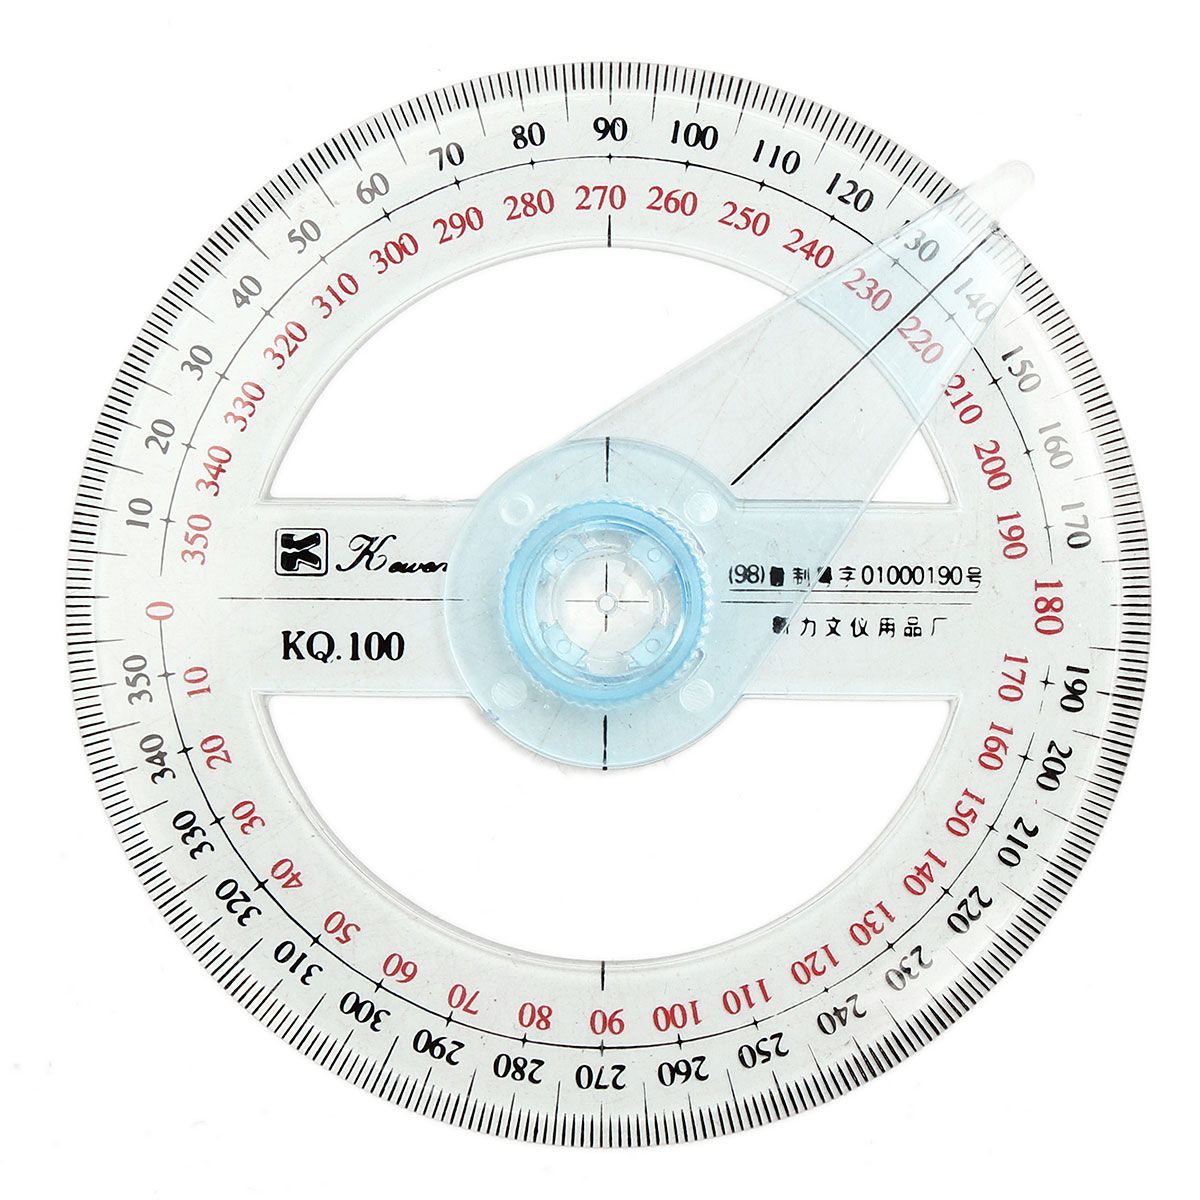 10cm-Plastic-360-Degree-Protractor-Ruler-Angle-Finder-Swing-Arm-School-Office-1052393